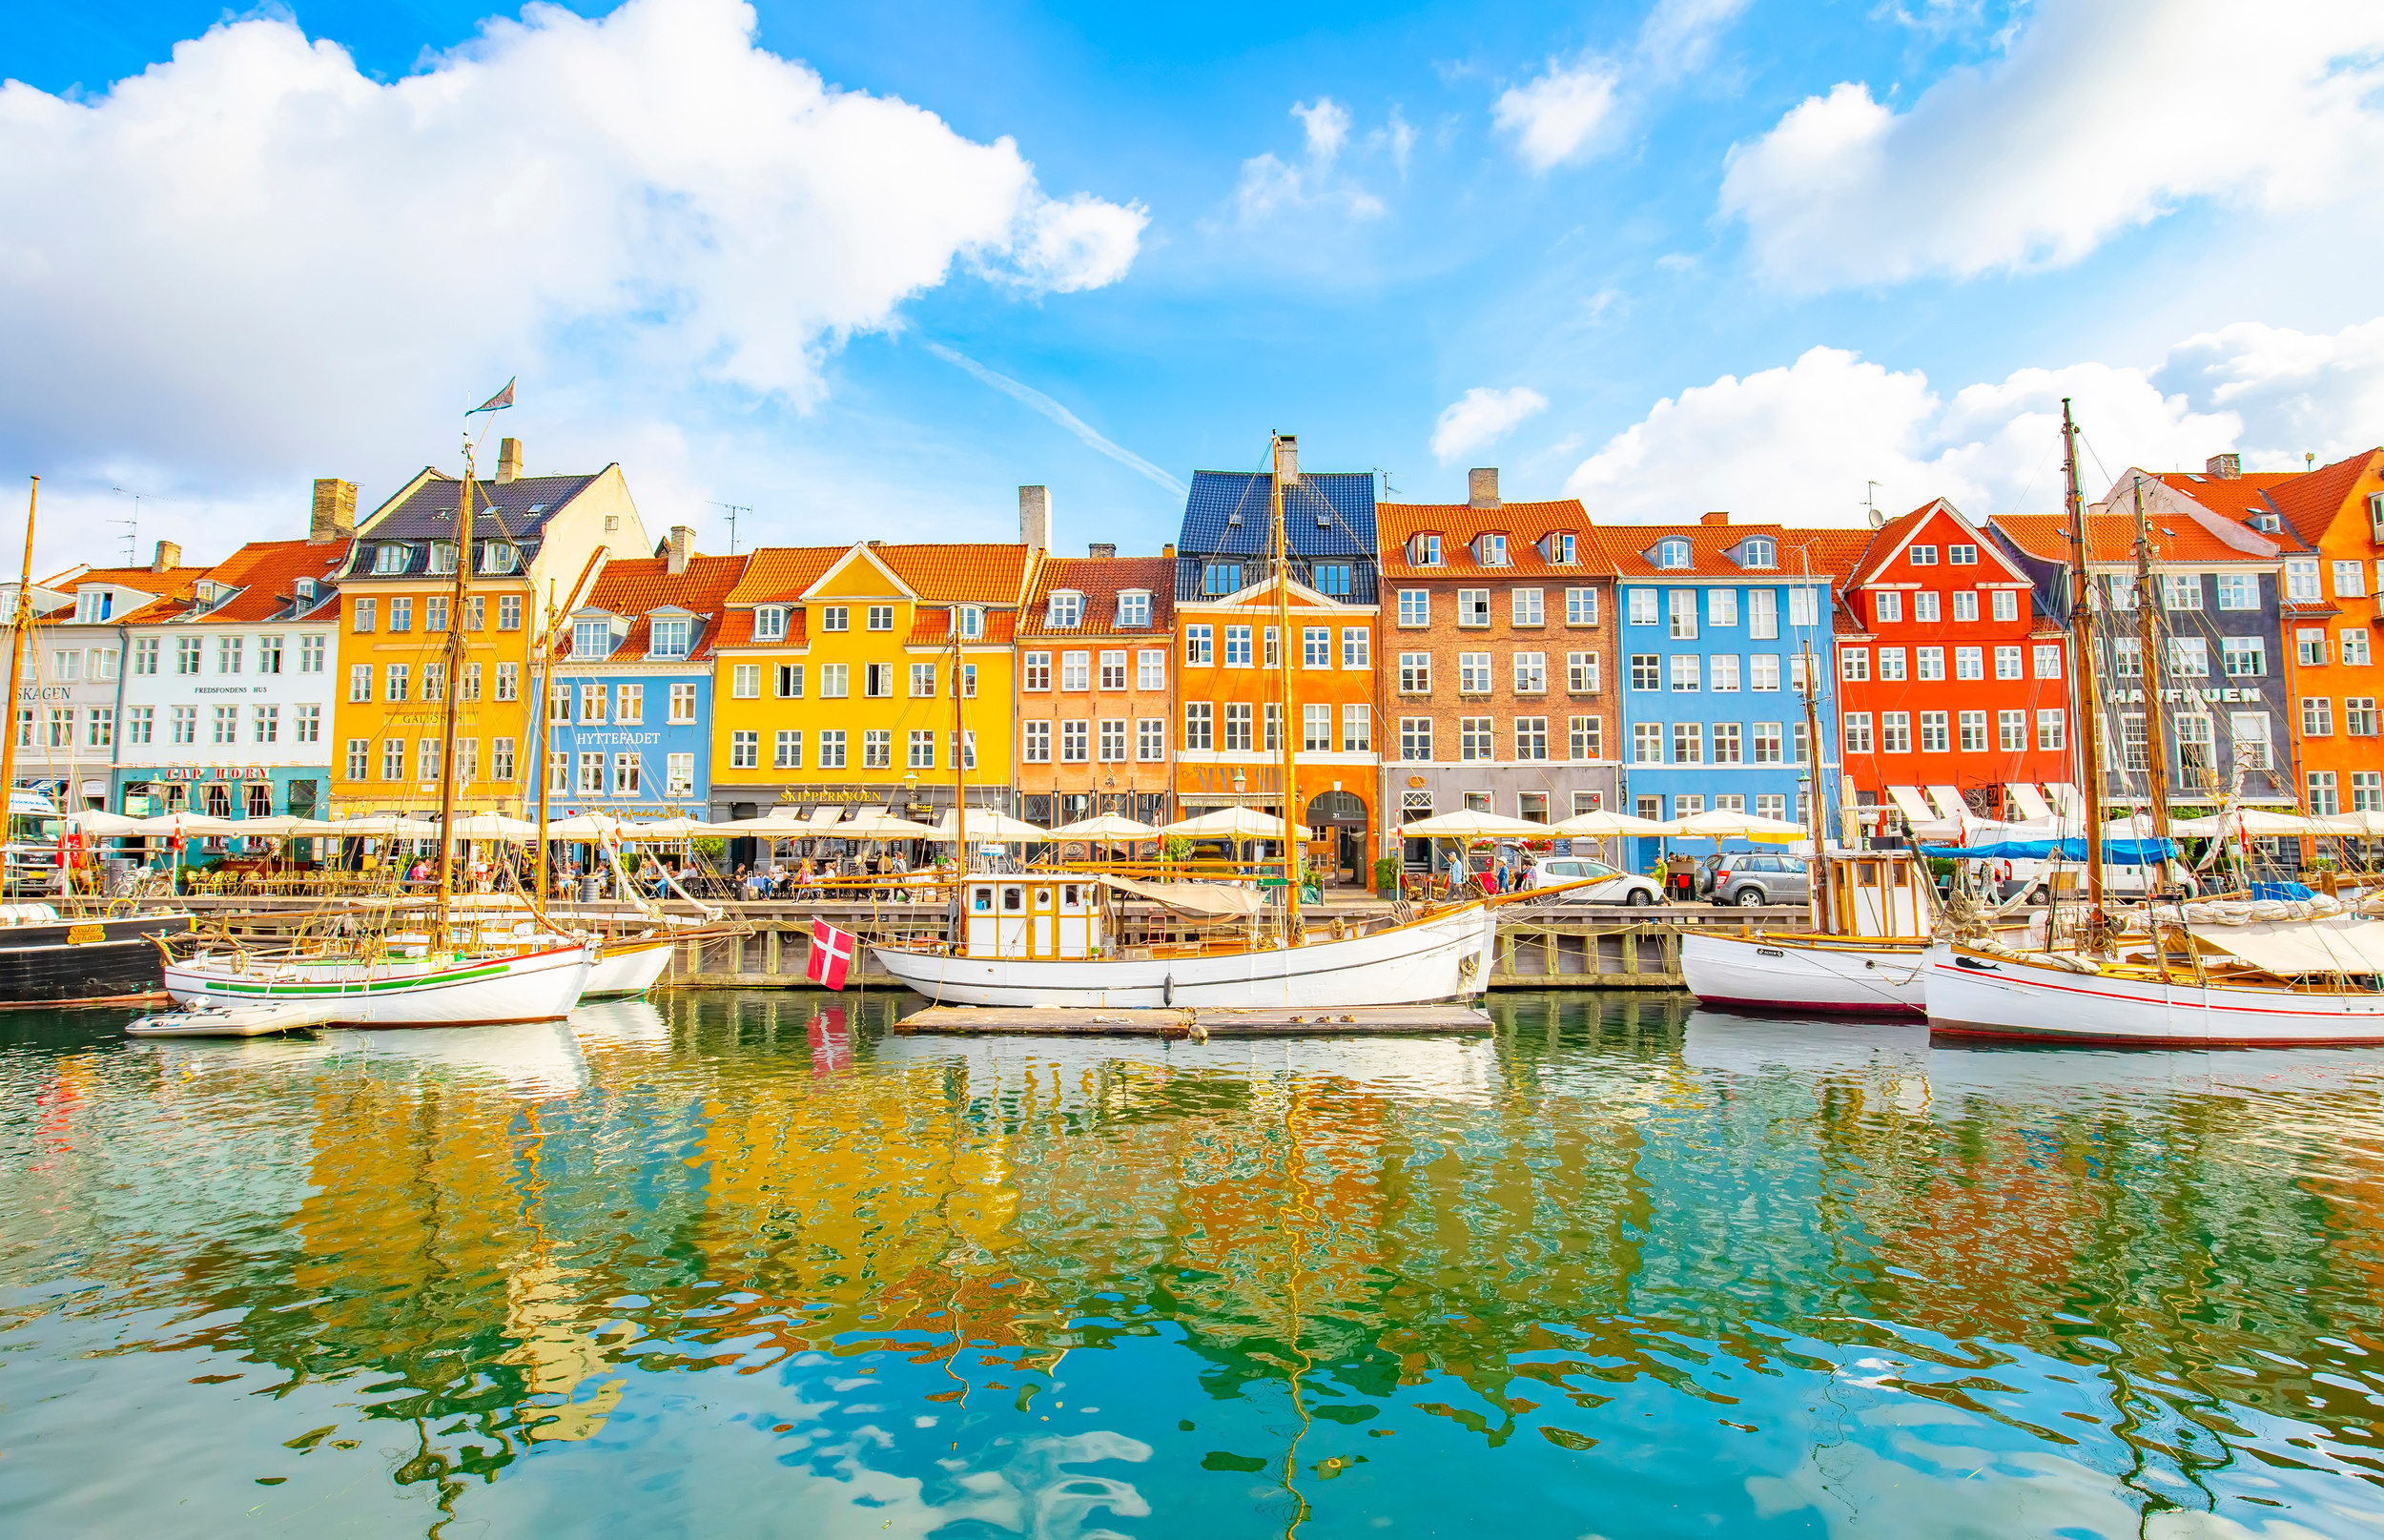 <p>The Danish capital is quite trendy and popular among foodies, thanks to the many high-end restaurants that call it home. However, spring is probably the best time to visit as you’ll be able to dine outside and enjoy the markets in the sun.</p><p><a href='https://www.msn.com/en-us/community/channel/vid-cj9pqbr0vn9in2b6ddcd8sfgpfq6x6utp44fssrv6mc2gtybw0us'>Follow us on MSN to see more of our exclusive lifestyle content.</a></p>